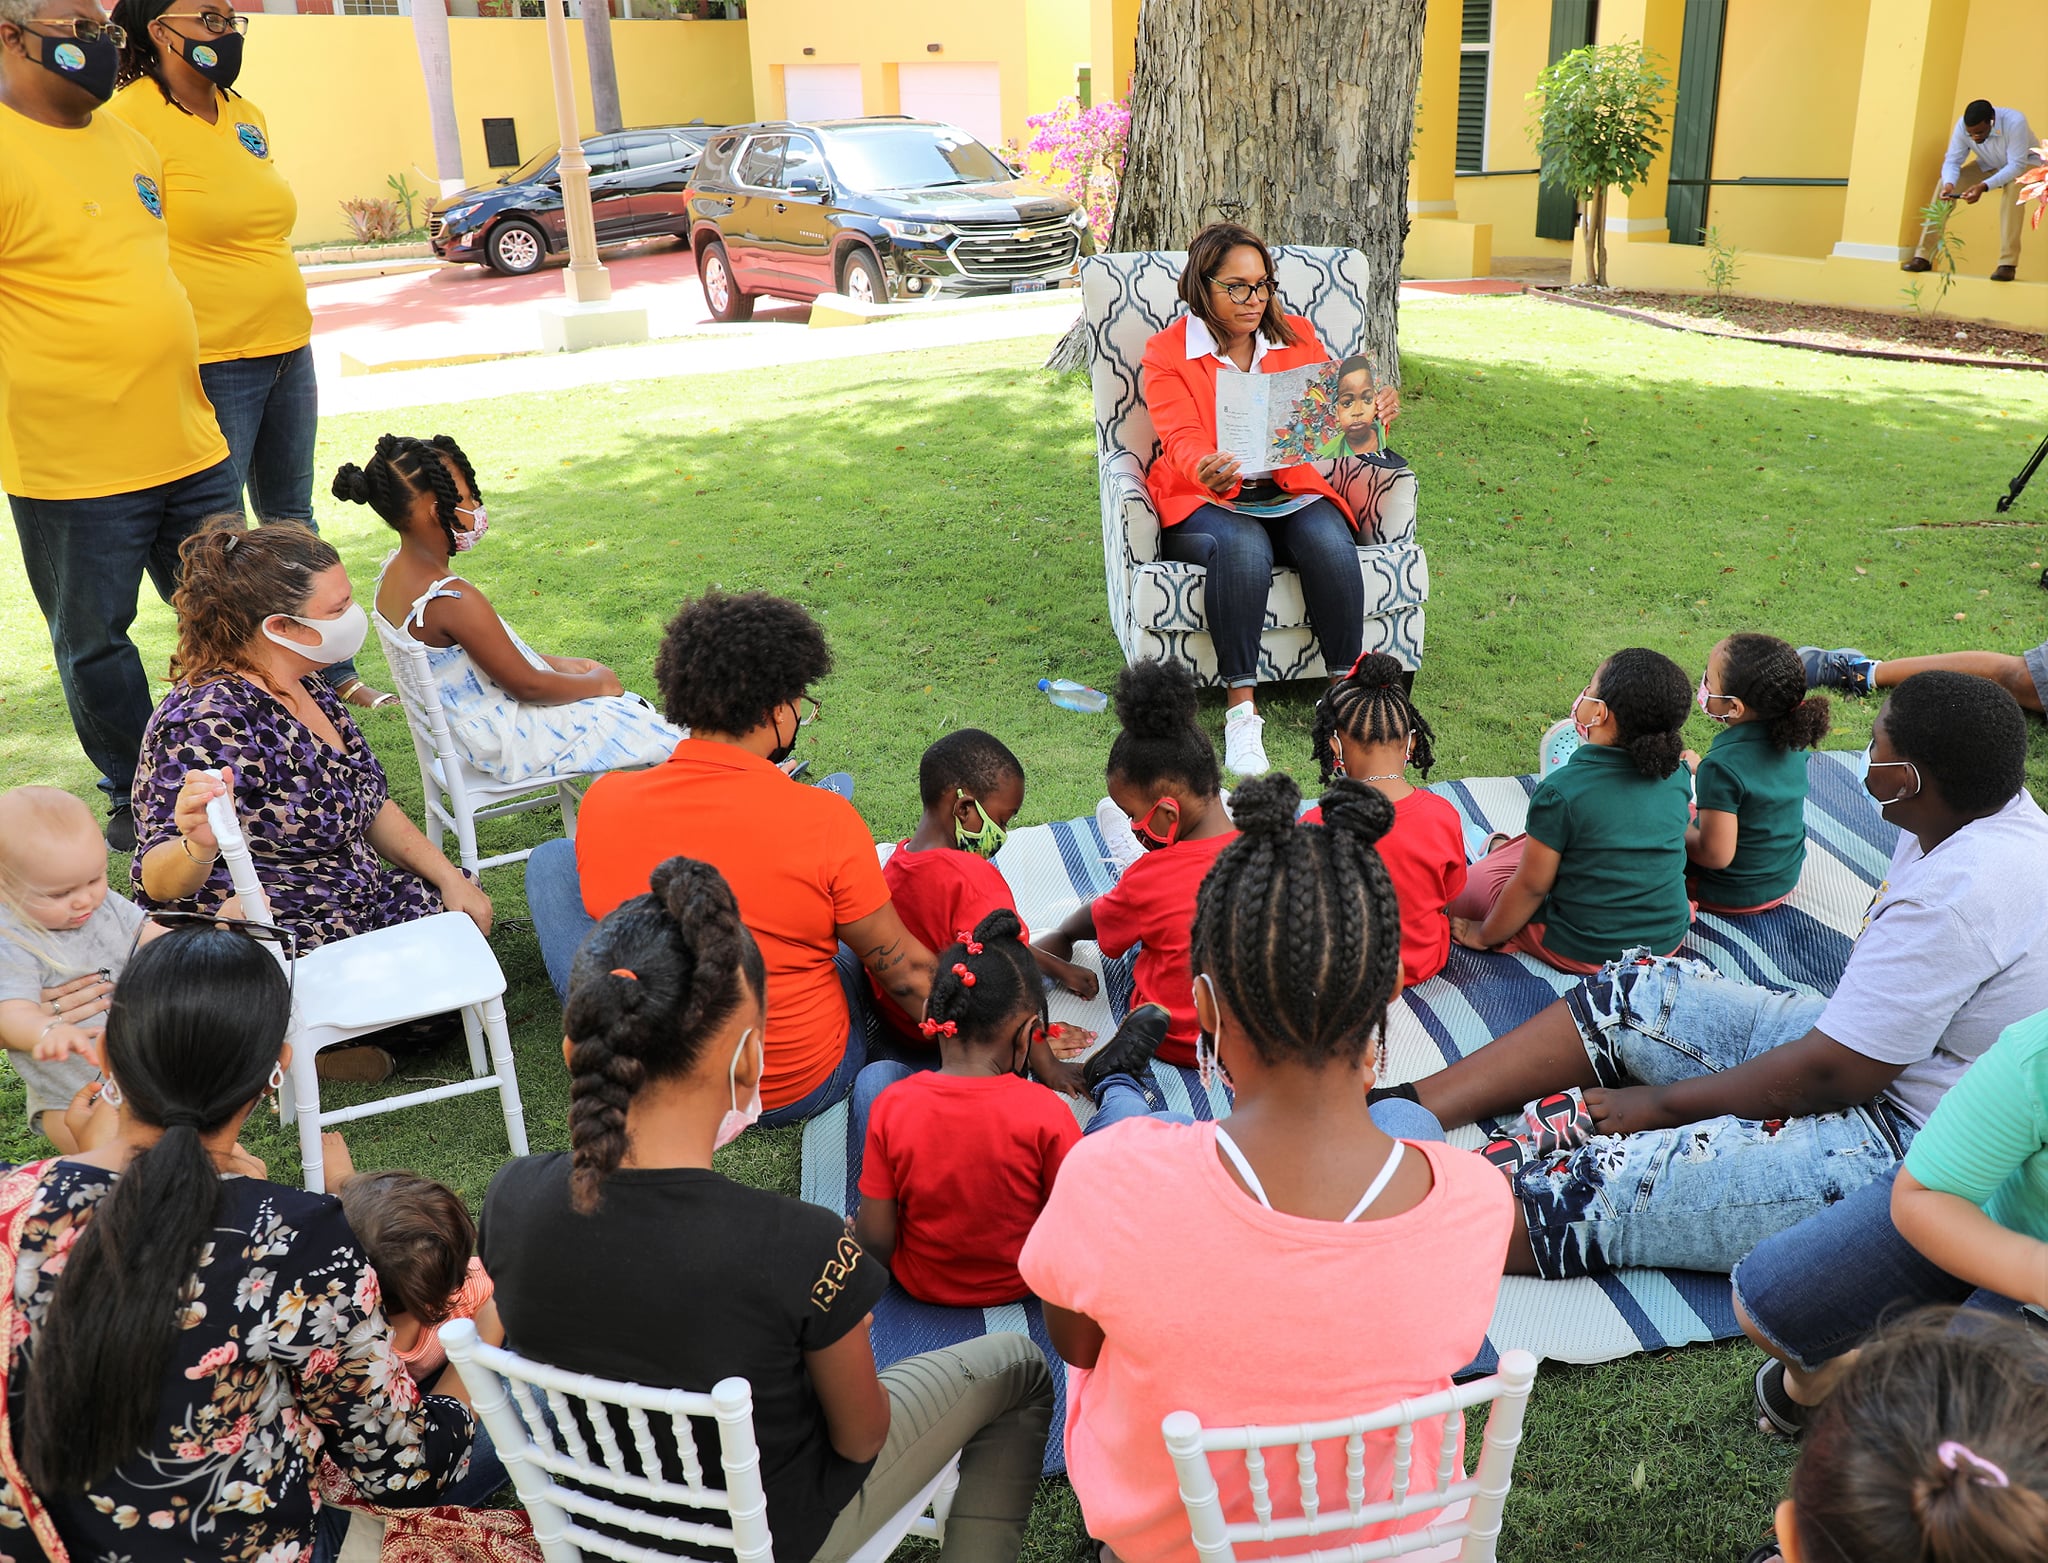 First Lady Yolanda Bryan Is Guest Reader For Story Time On Wheels Tomorrow